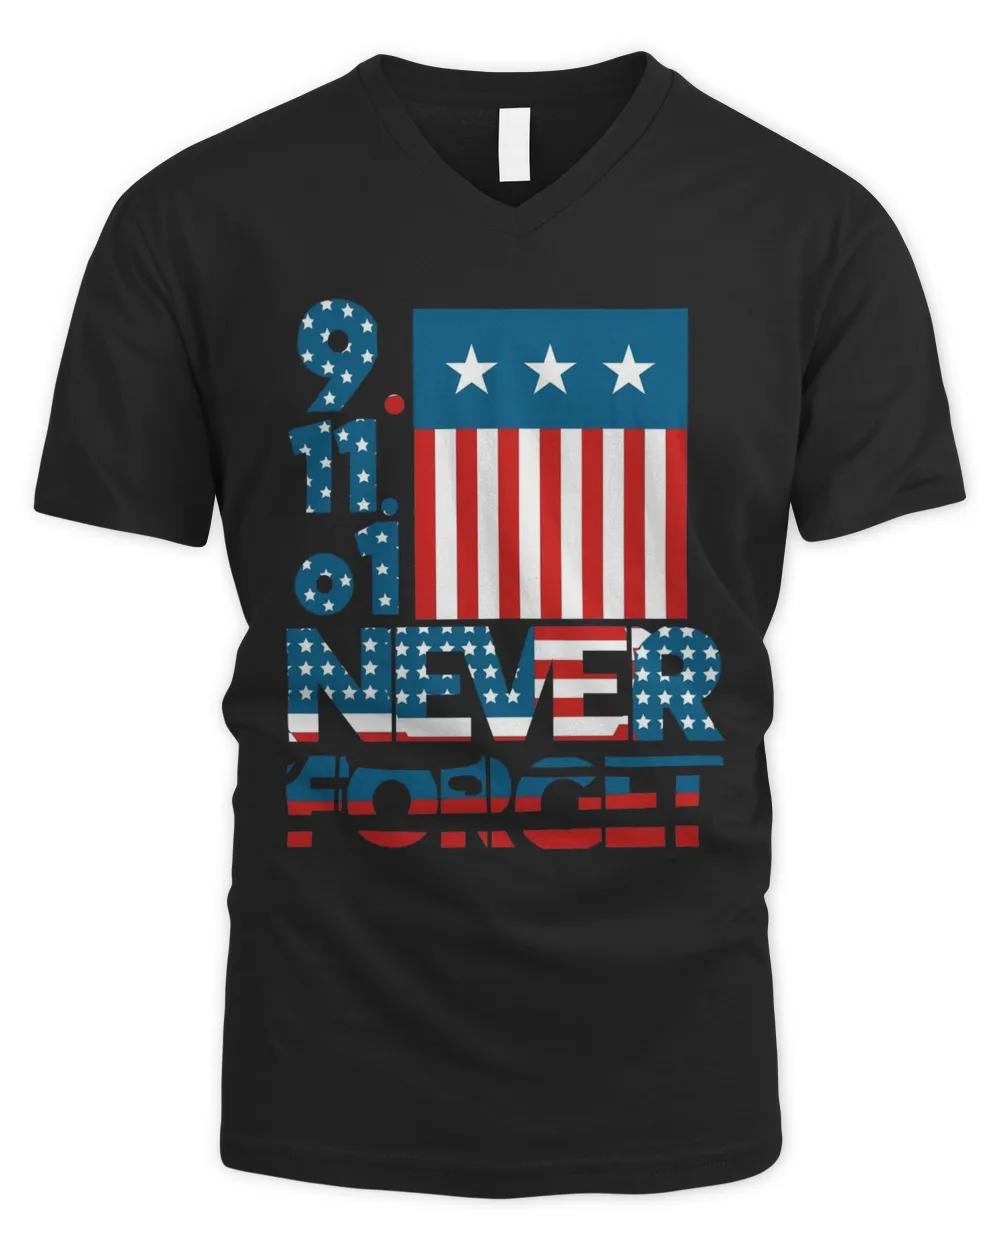 9.11.01 Never Forget Patriot Day American Flag T-Shirt